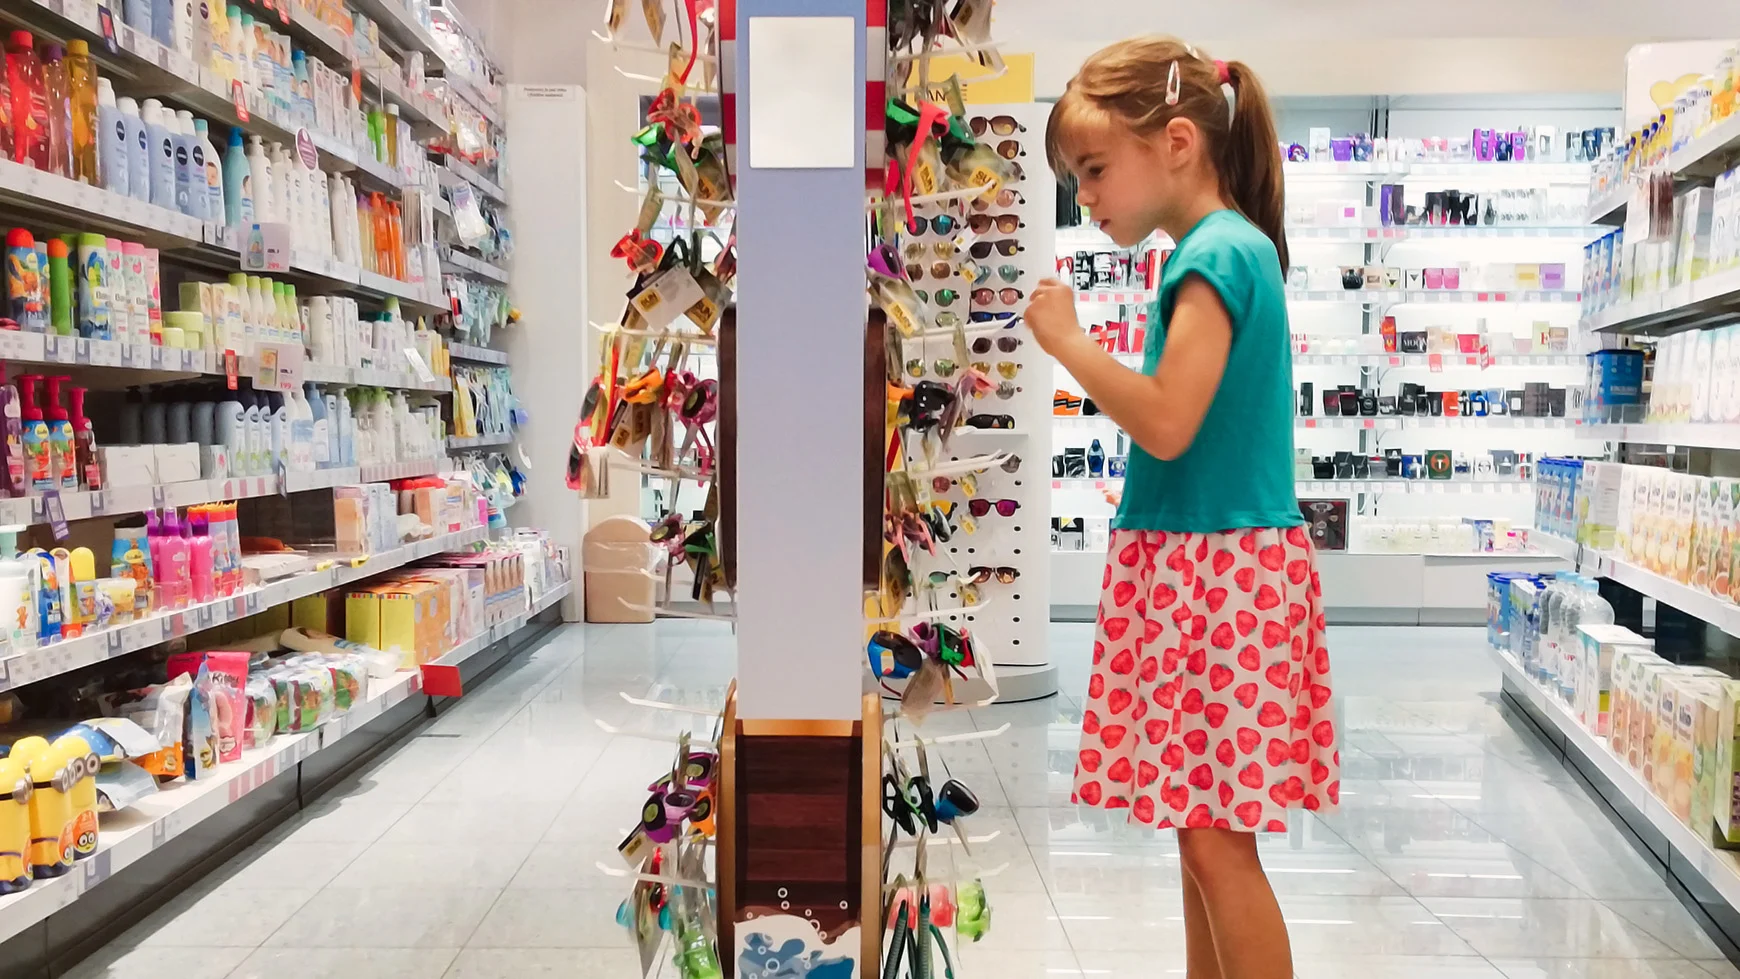 A young child looks at a rack of sunglasses in a store. 